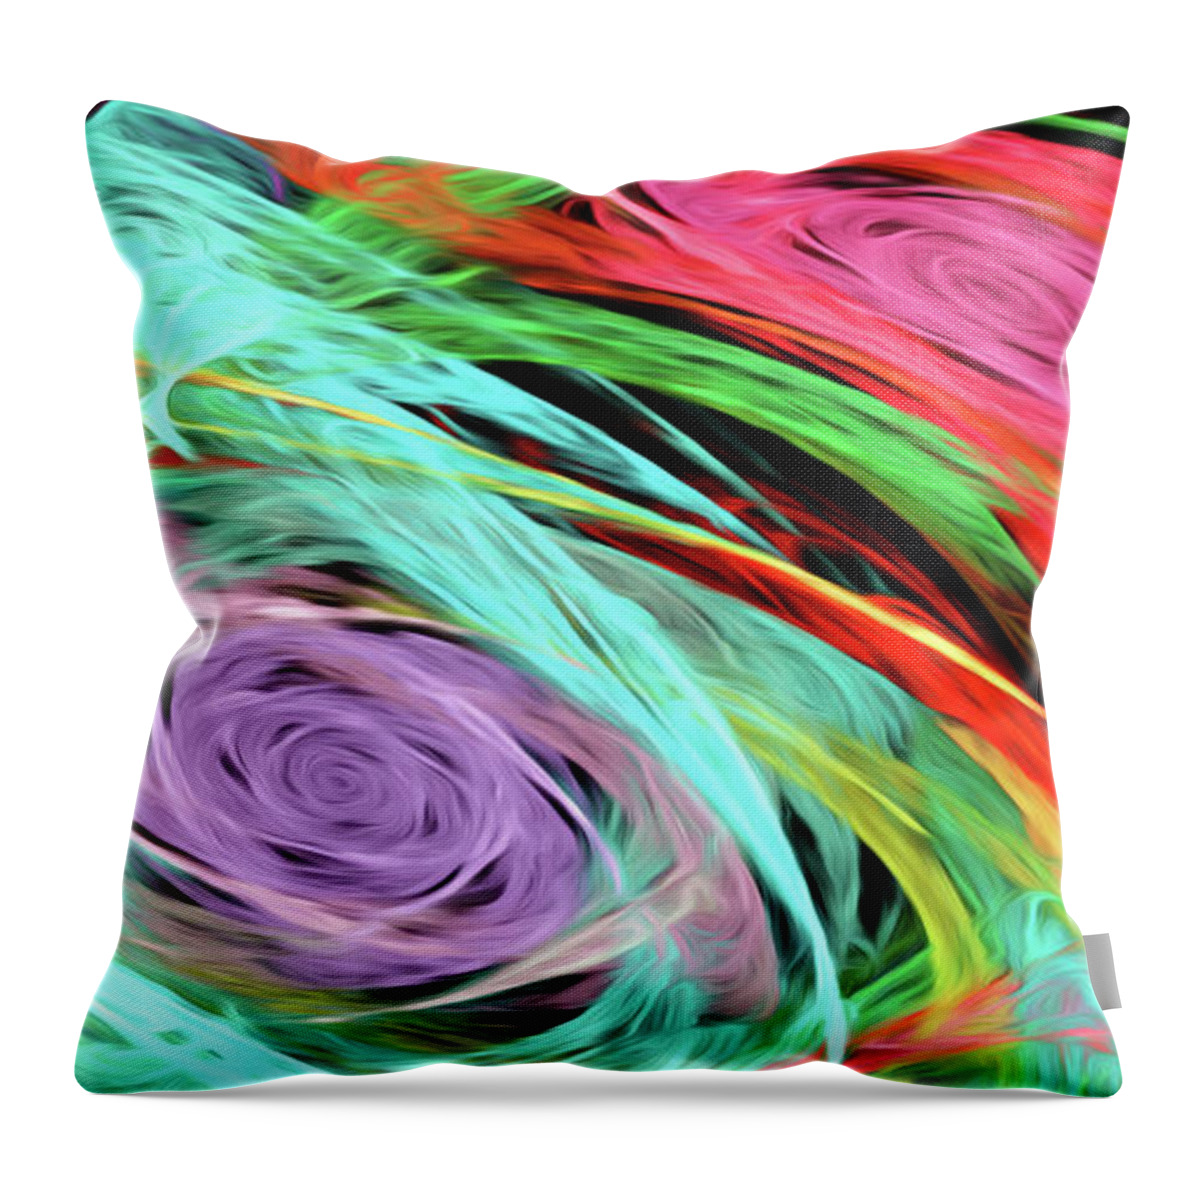 Panorama Throw Pillow featuring the digital art Andee Design Abstract 7 2015 by Andee Design